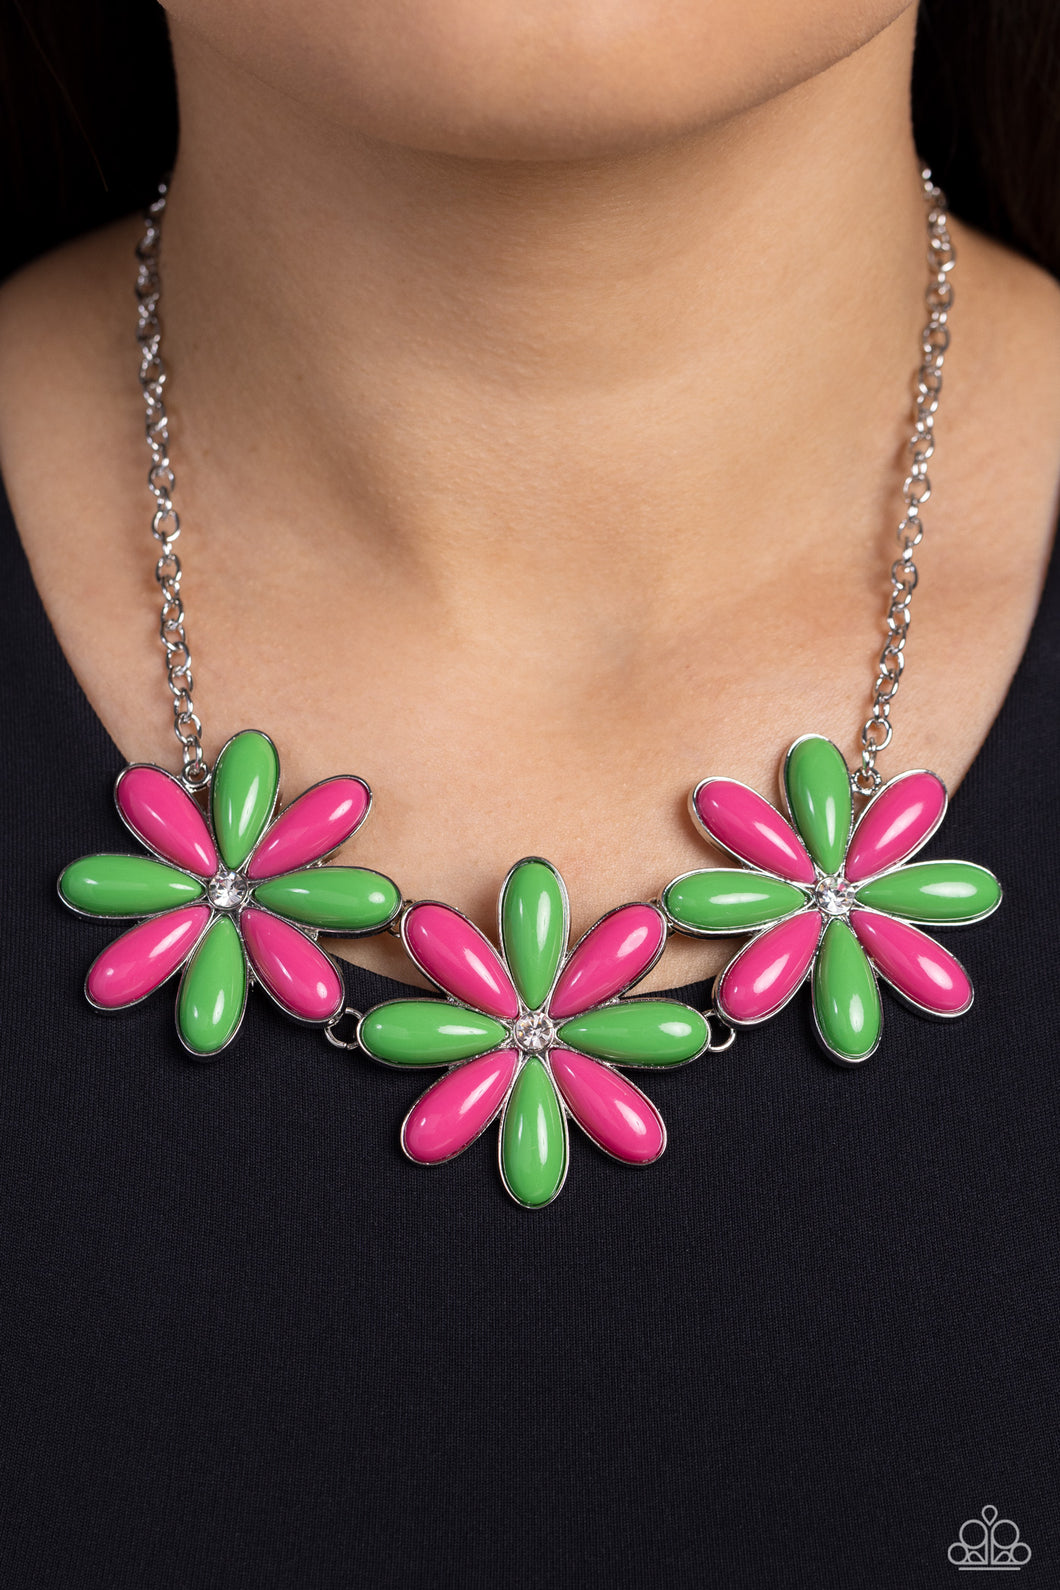 Dotted with white rhinestone centers, an elongated assortment of Classic Green and Pink Peacock beaded flowers link below the collar for a playful pop of color. Features an adjustable clasp closure.  Sold as one individual necklace. Includes one pair of matching earrings.